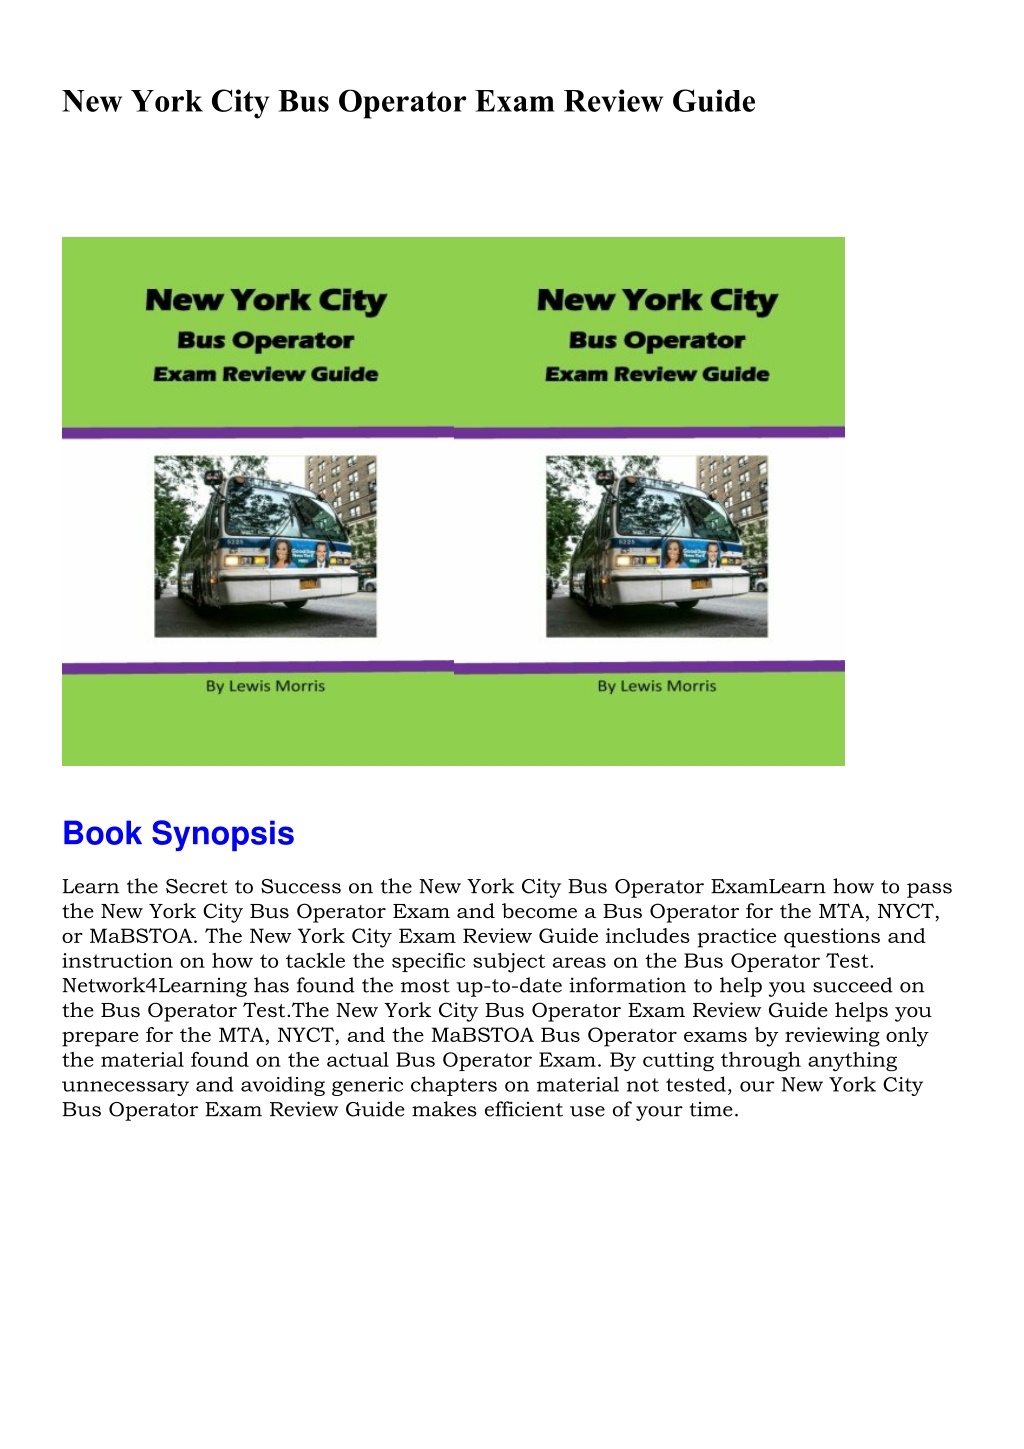 PPT EPUB New York City Bus Operator Exam Review Guide PowerPoint